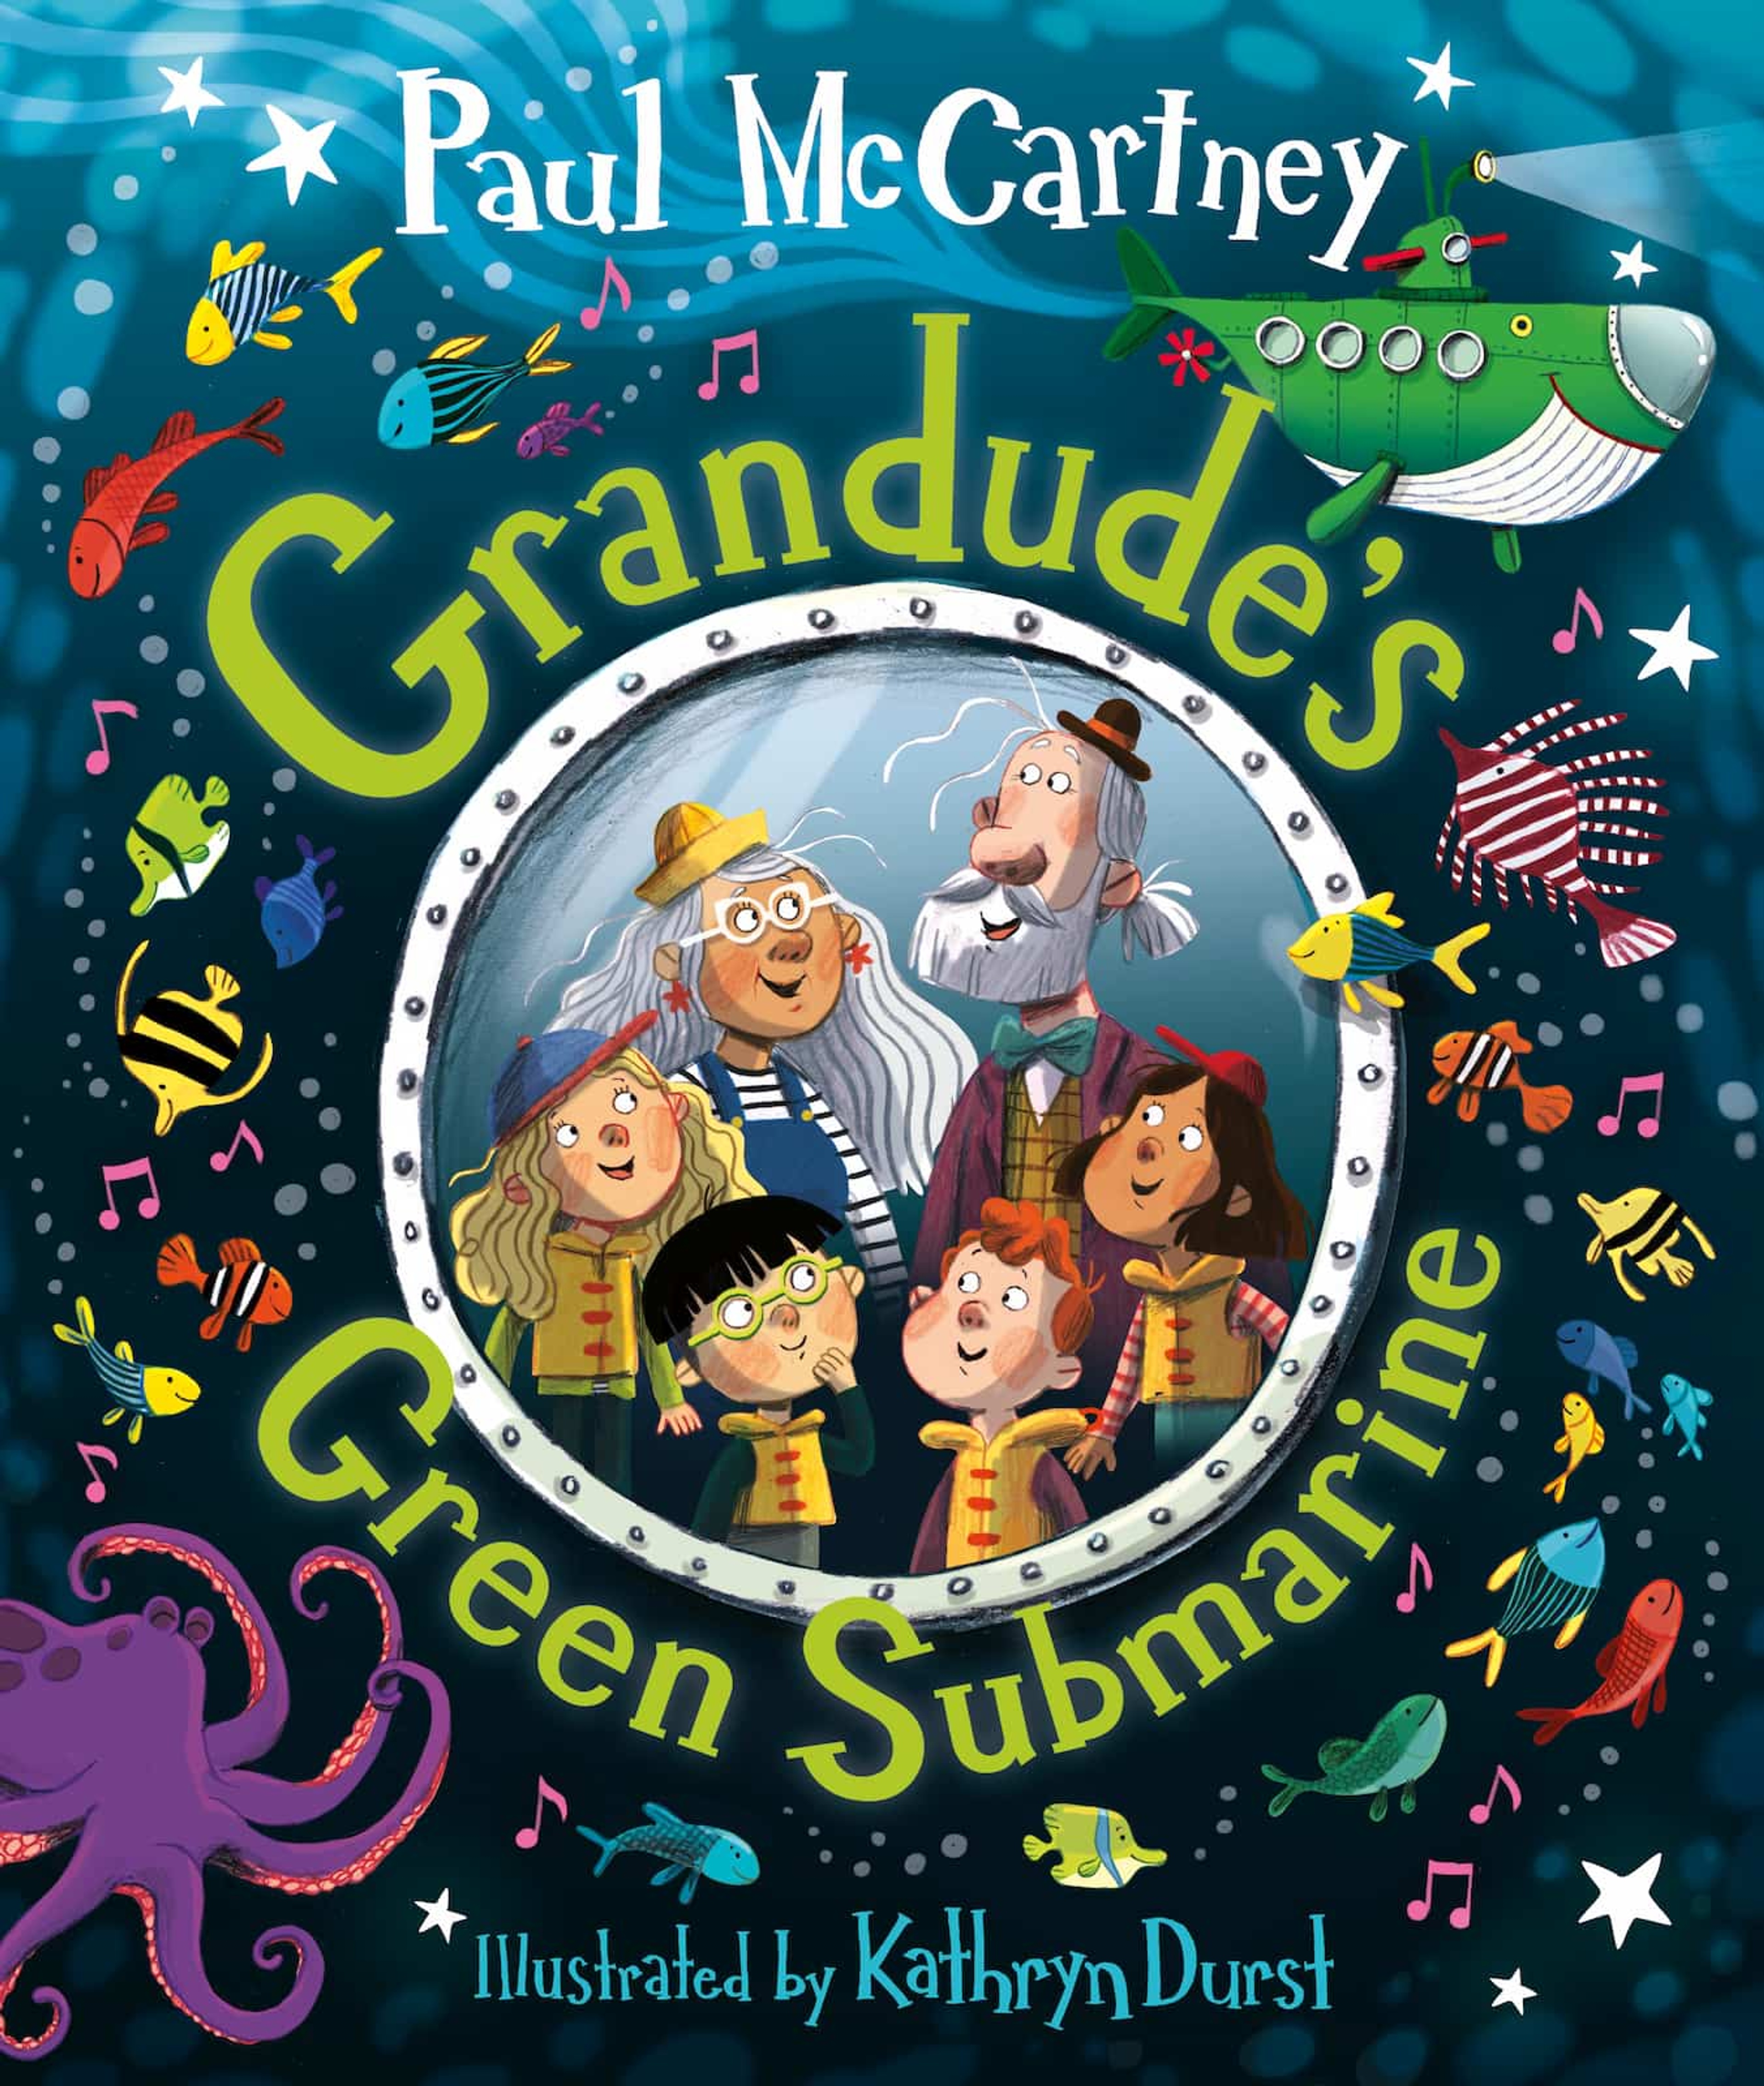 The book cover to Paul's picture book 'Grandude's Green Submarine'